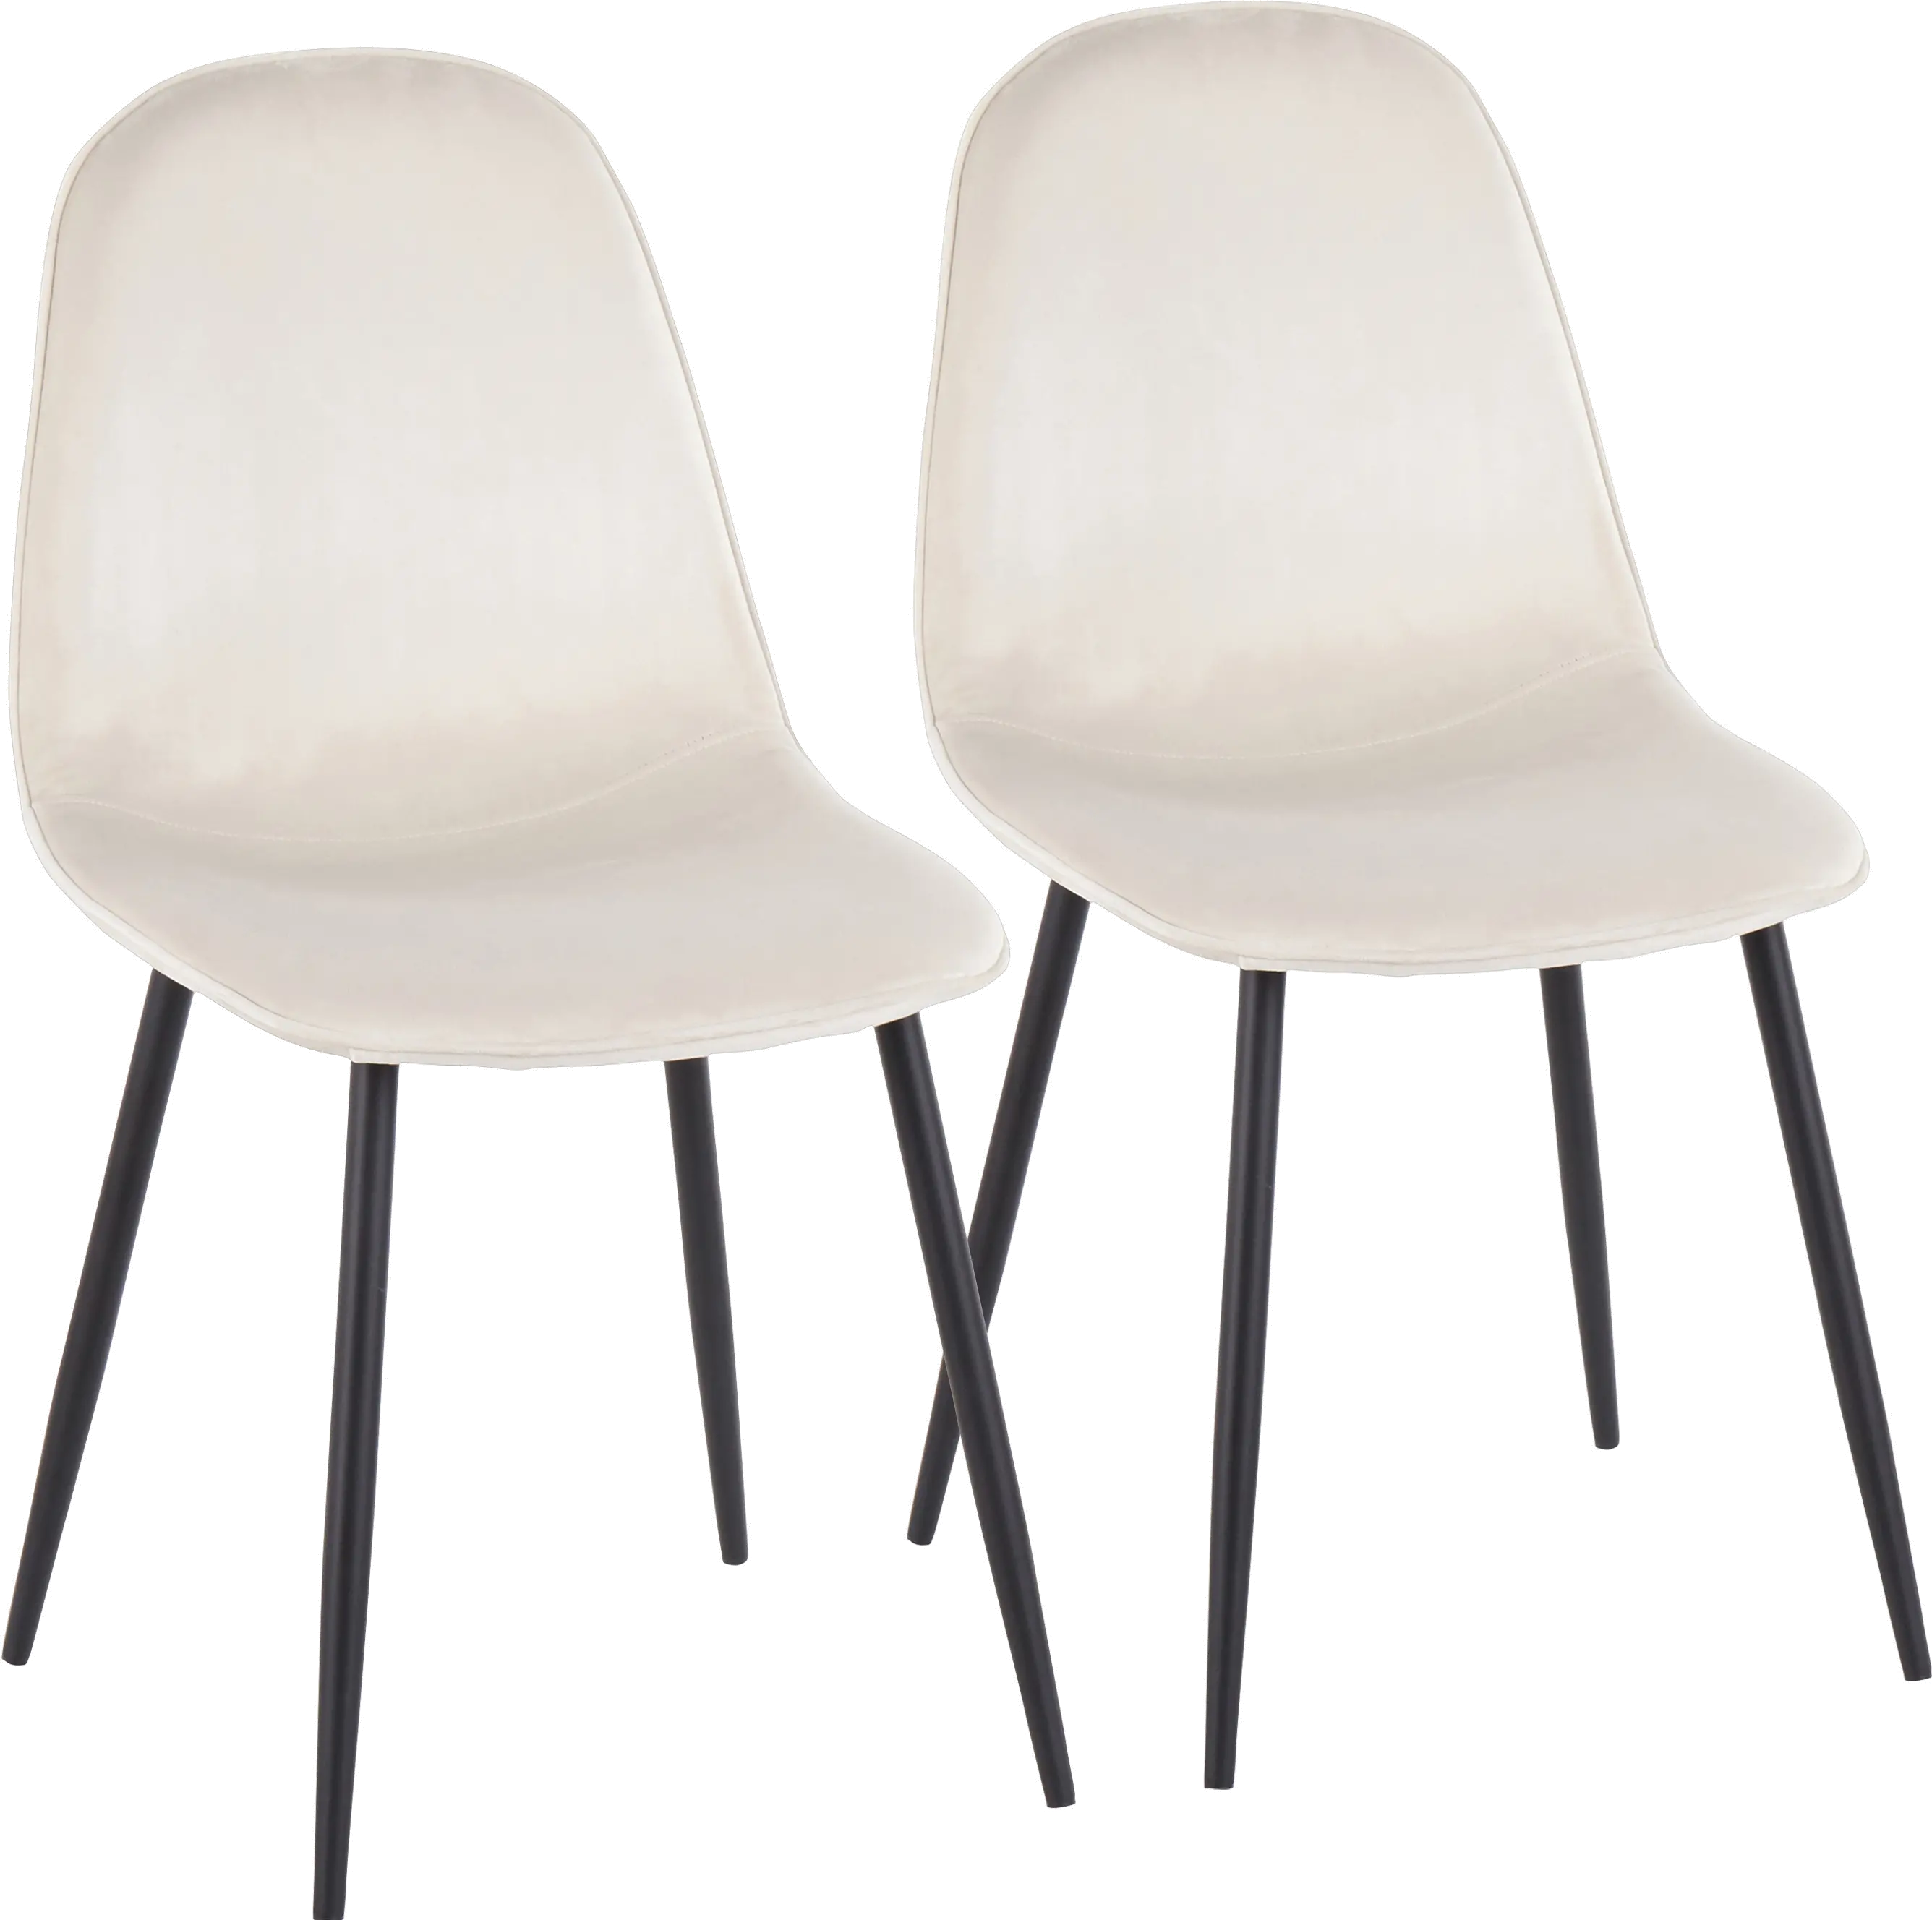 Contemporary Cream and Black Dining Room Chair (Set of 2) - Pebble